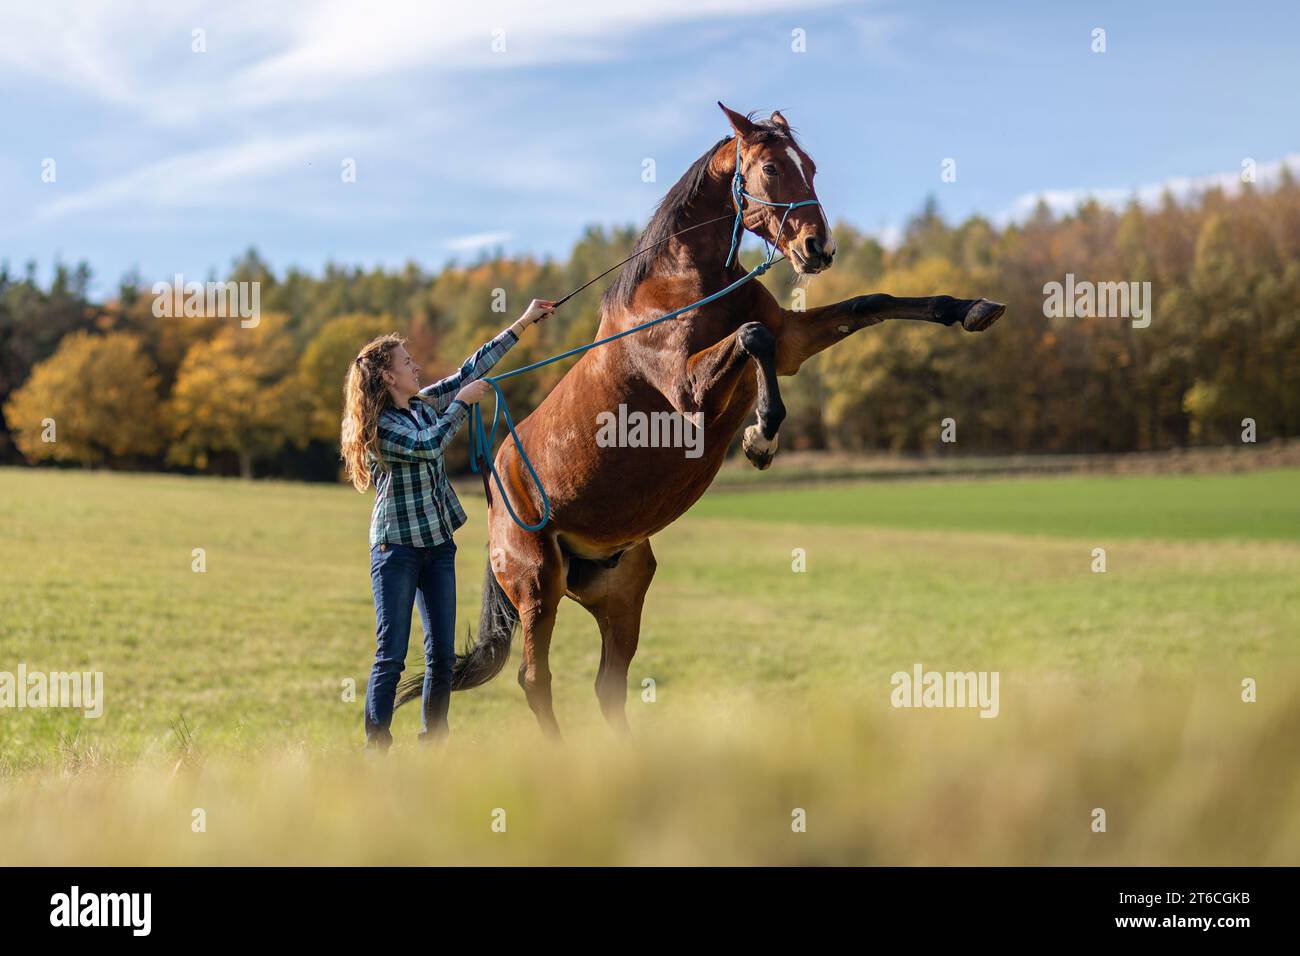 A young female equestrian showing a trick with her bay brown trotter horse, rearing horse, natural horsemanship and horse training concept Stock Photo